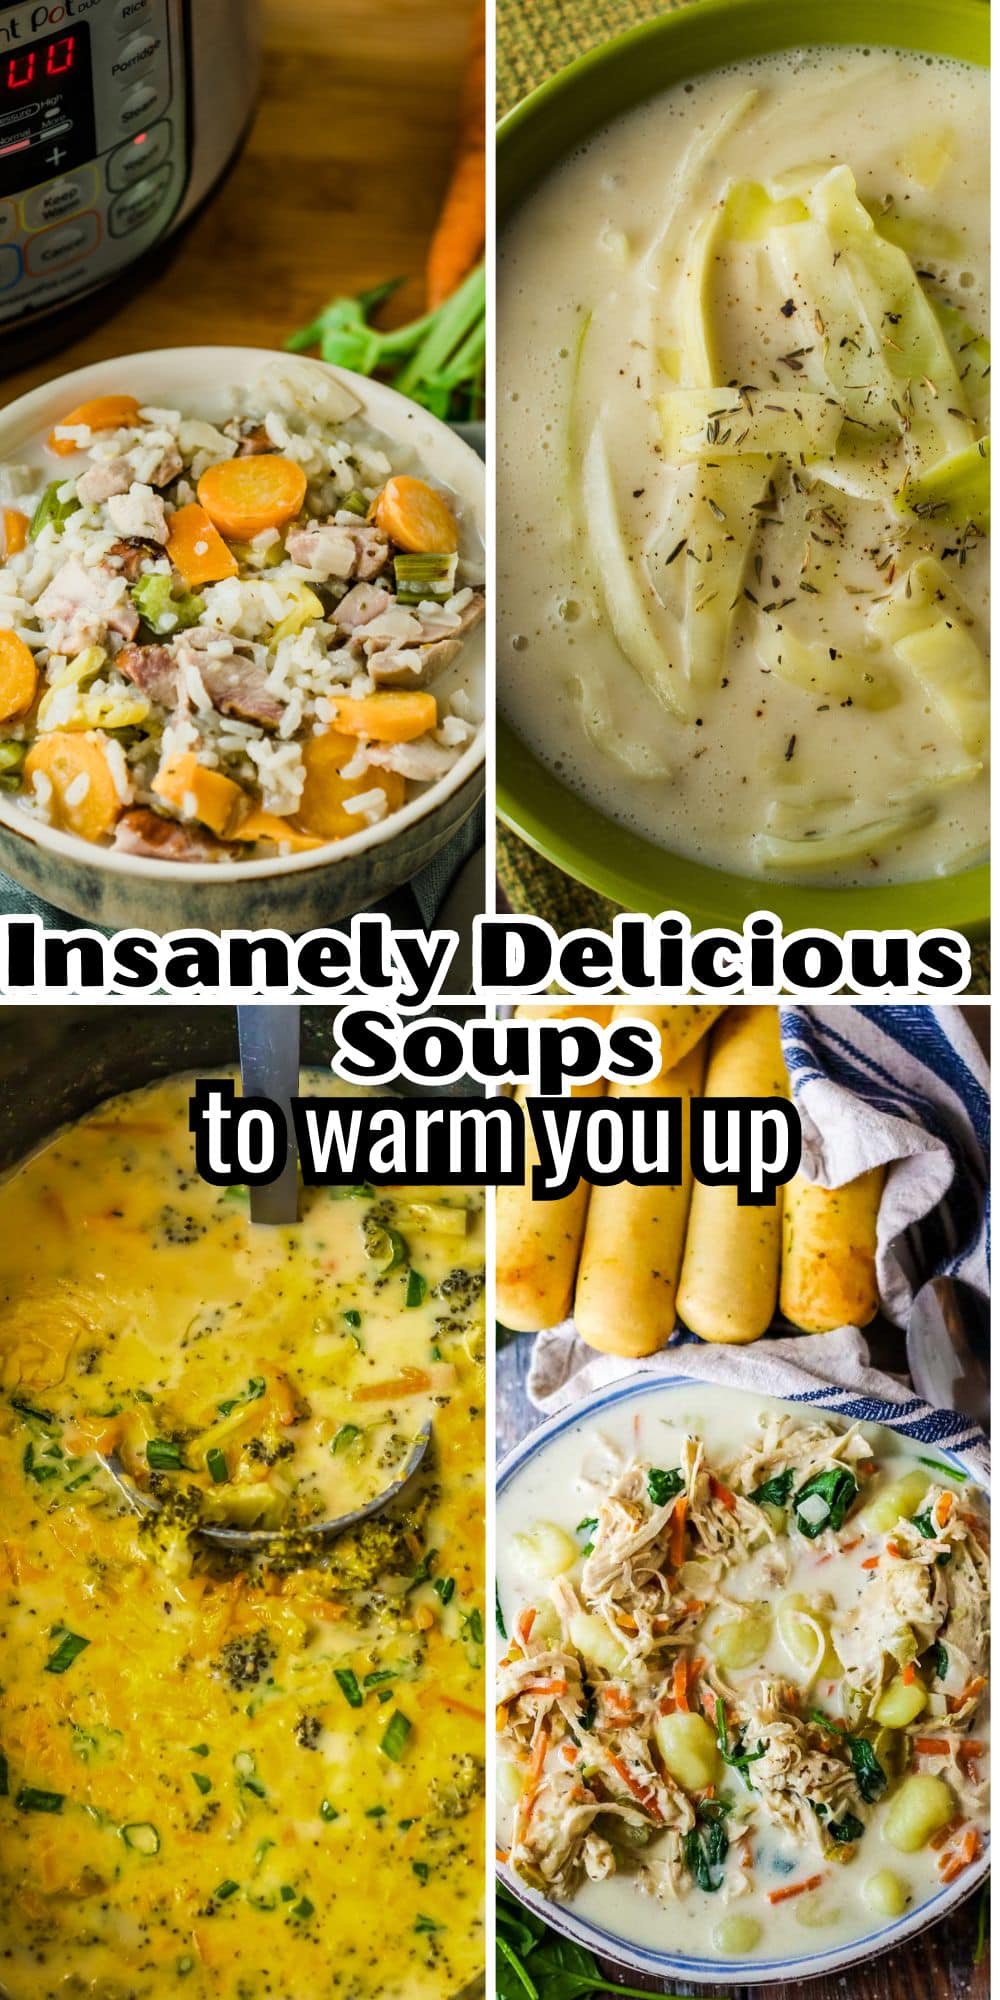 Insanity delicious soups to warm you up.